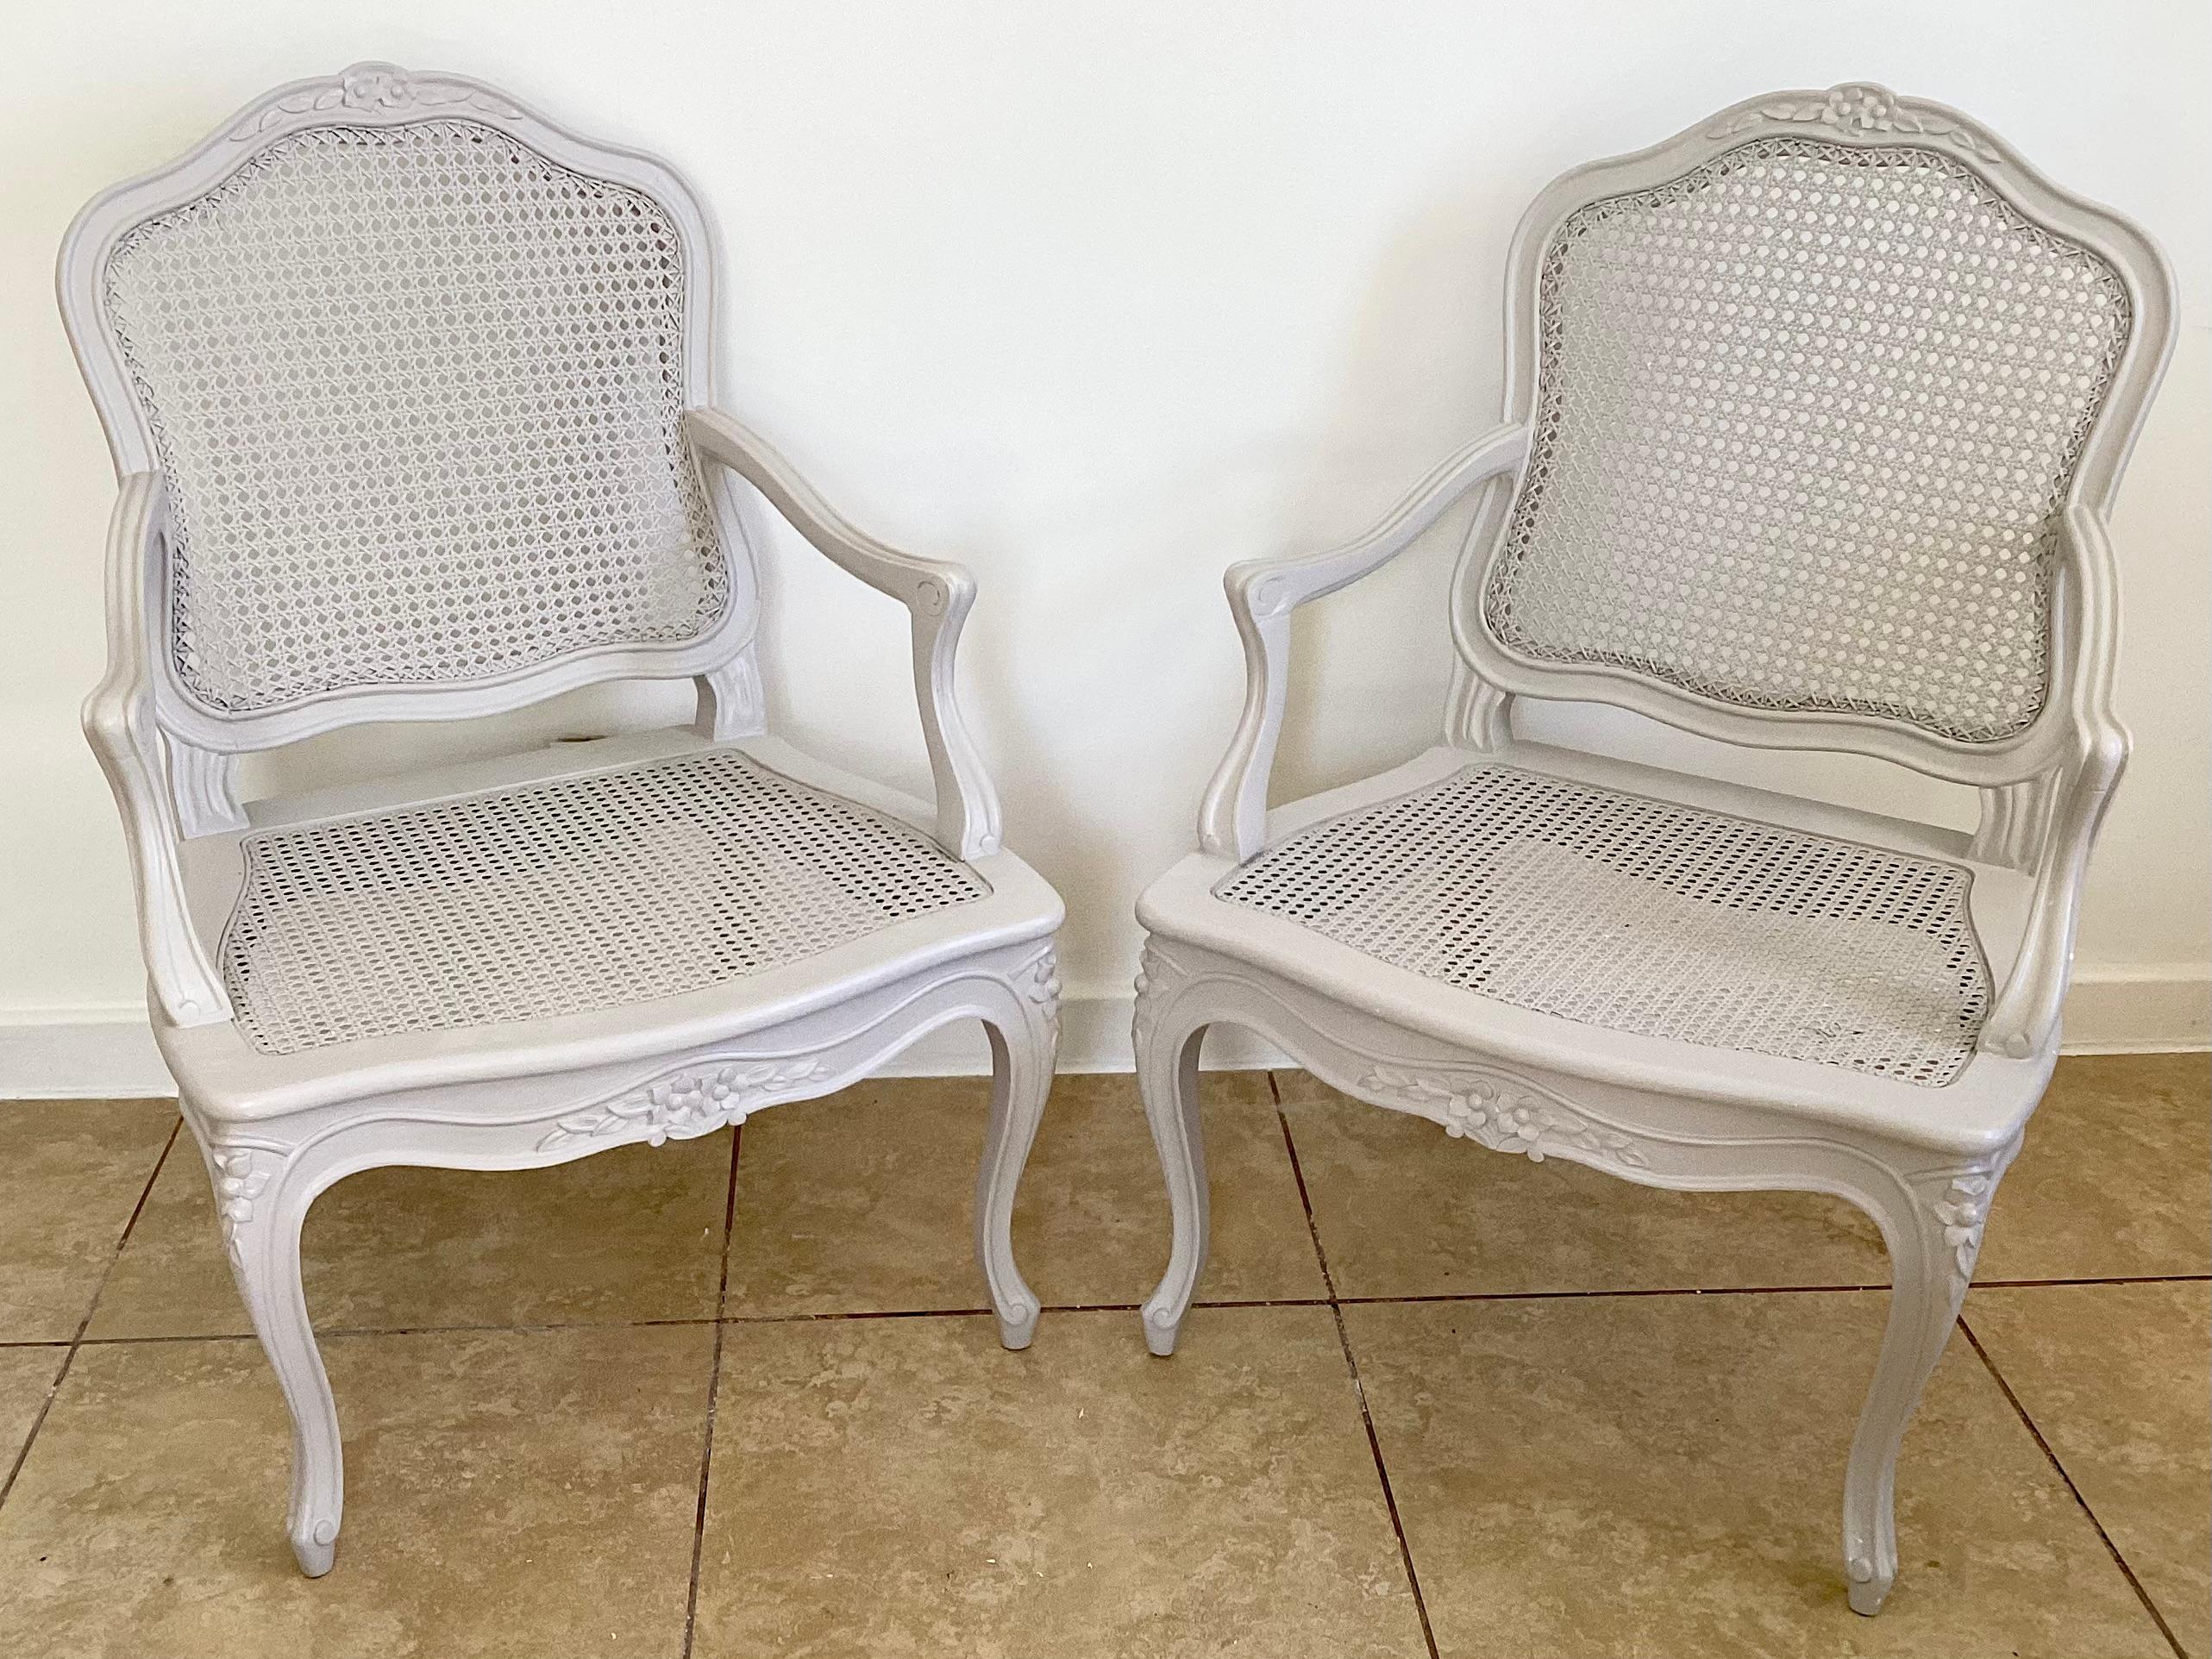 Mid-19th Century French Louis XV Fauteuil Guggenheim Collection, a Pair In Good Condition For Sale In Los Angeles, CA